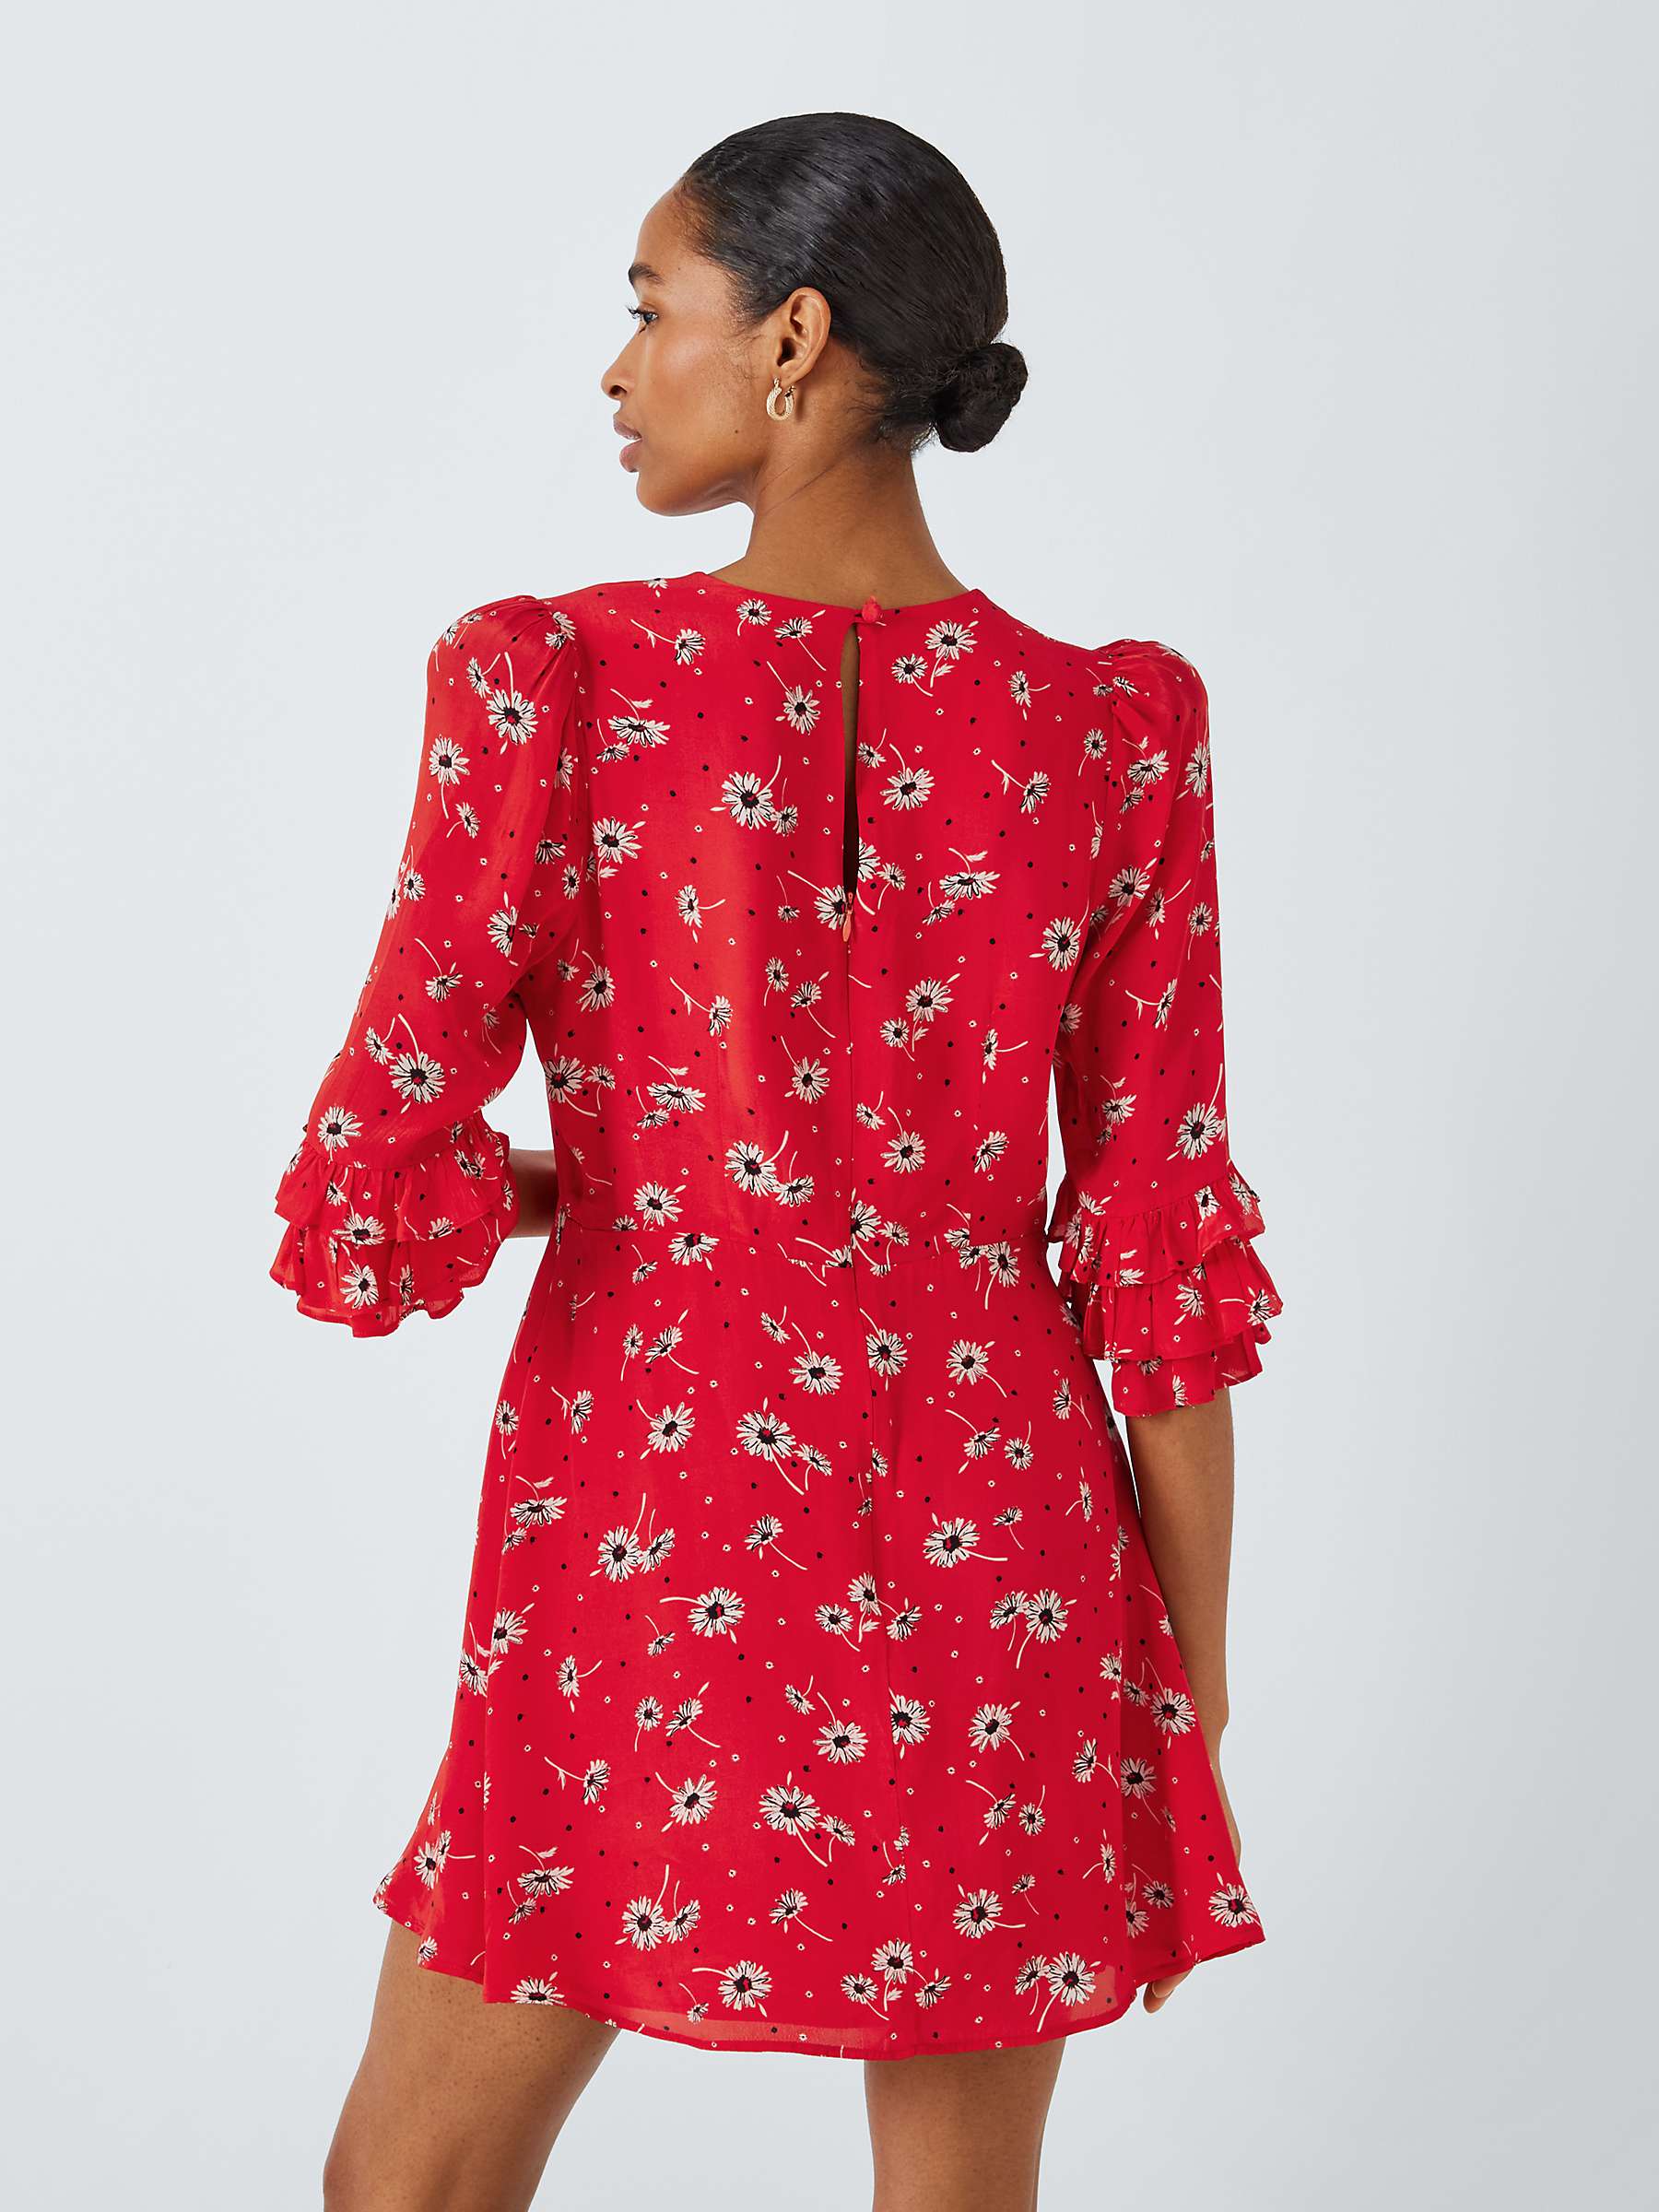 Buy Queens of archive Peggy Daisy Print Mini Dress, Red/Multi Online at johnlewis.com